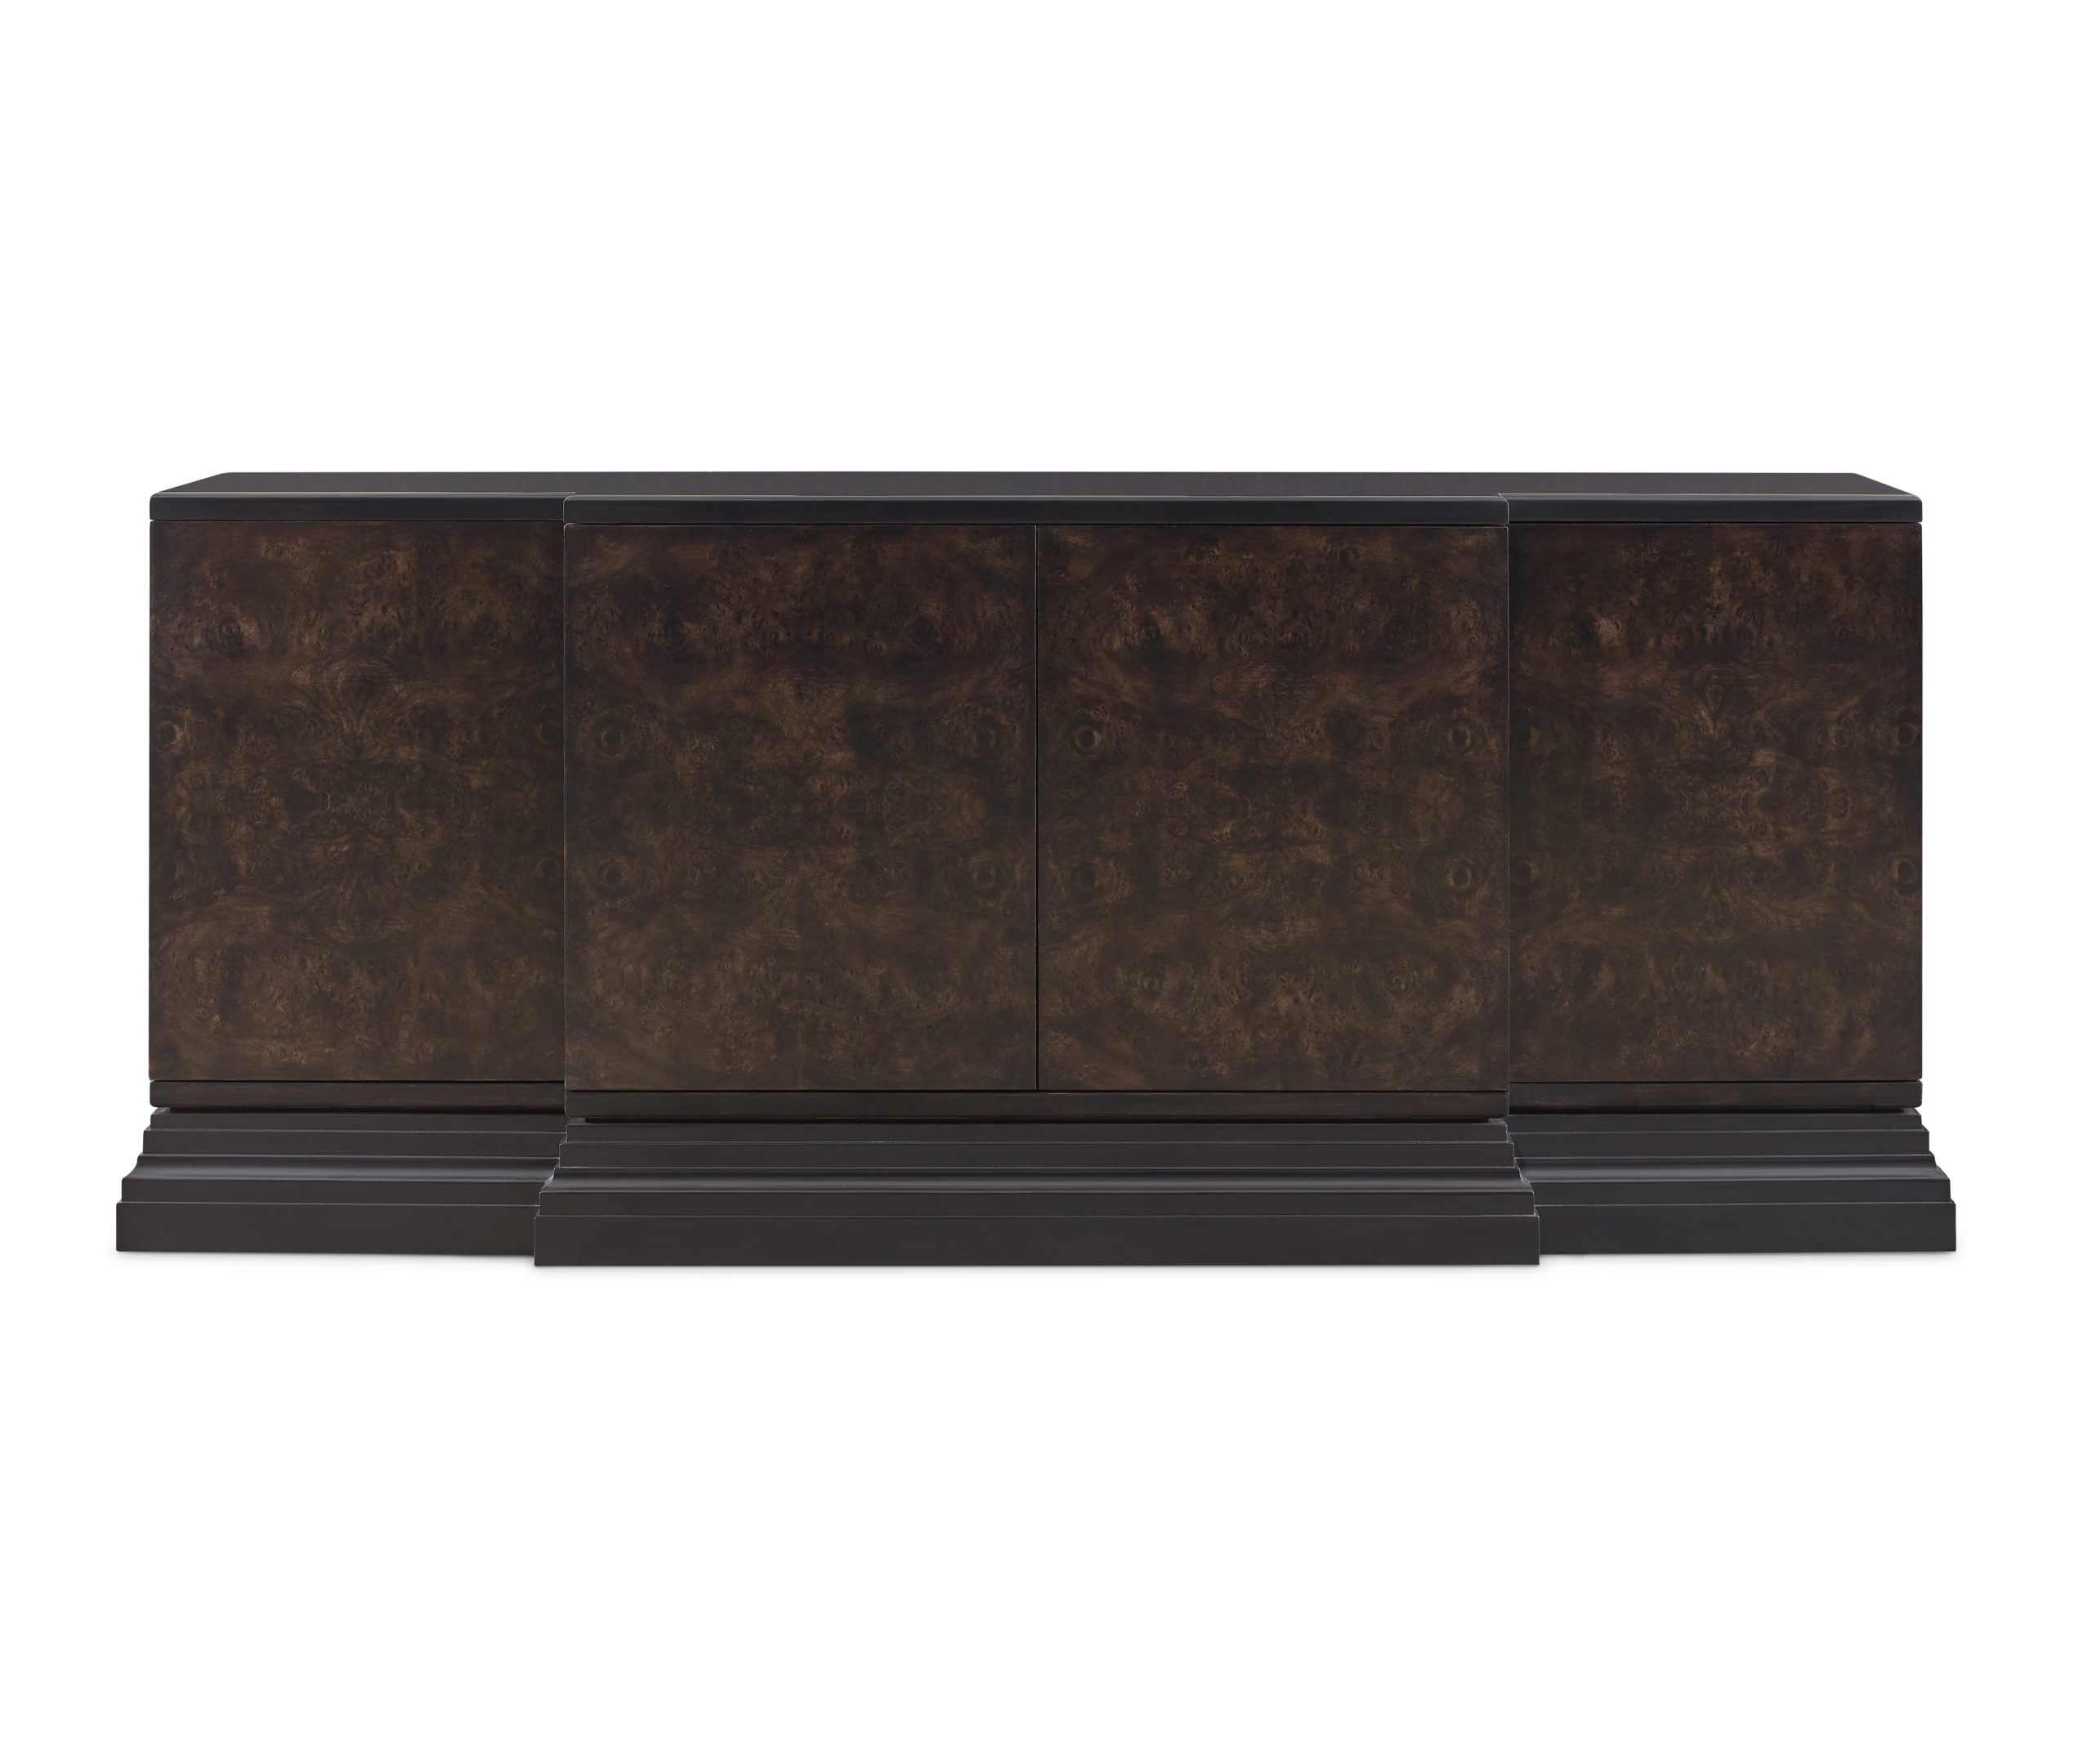 Baker_products_WNWN_maximus_credenza_BAA3030_FRONT-scaled-1